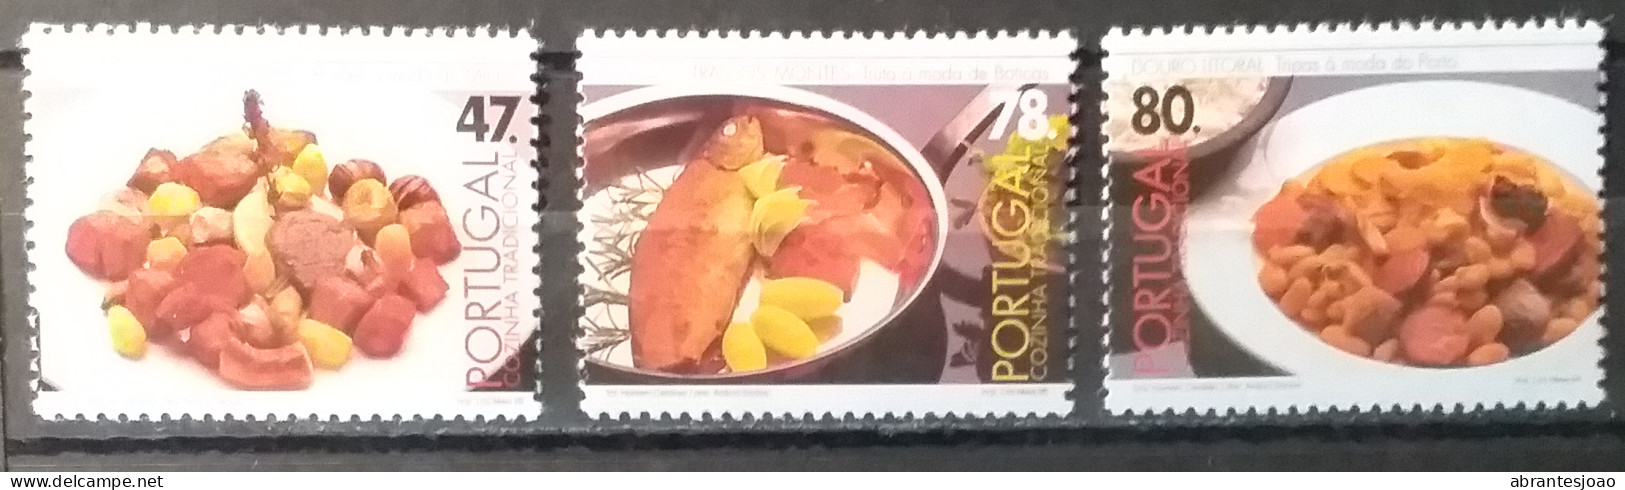 1996 - Portugal - MNH - Portuguese Traditional Cook - 6 Stamps - Nuevos